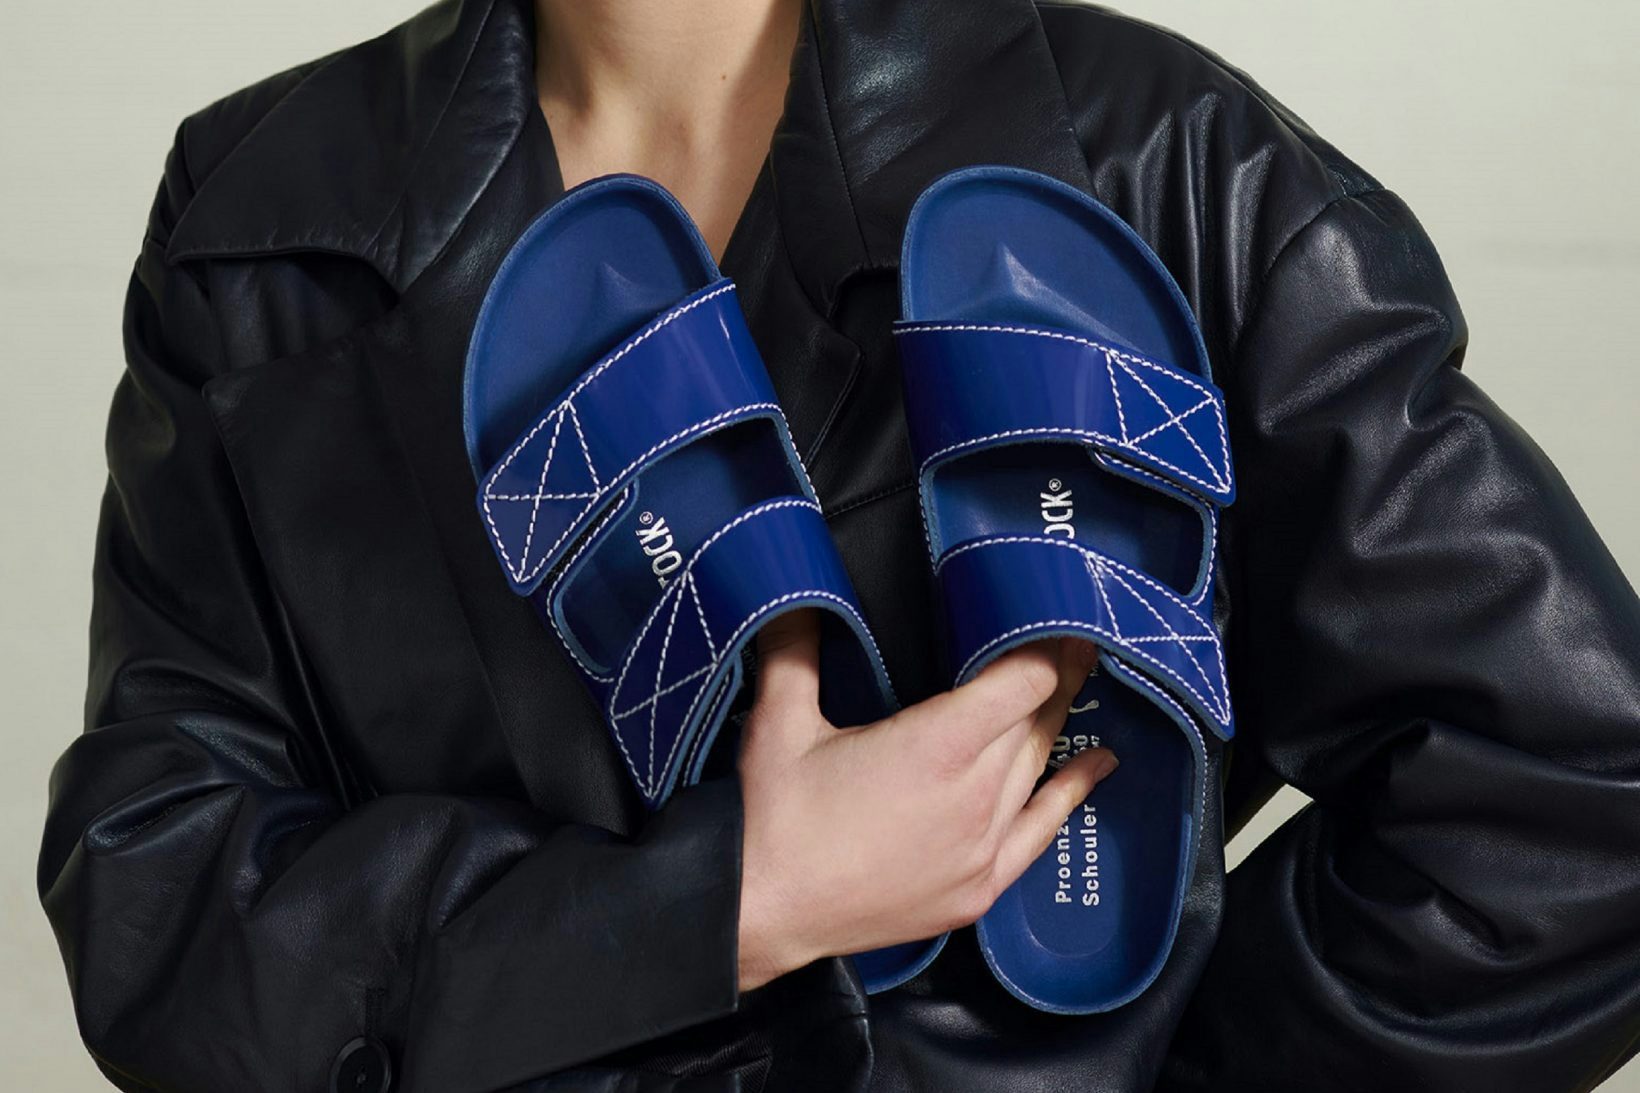 Birkenstock Just Can’t Stop Collaborating!